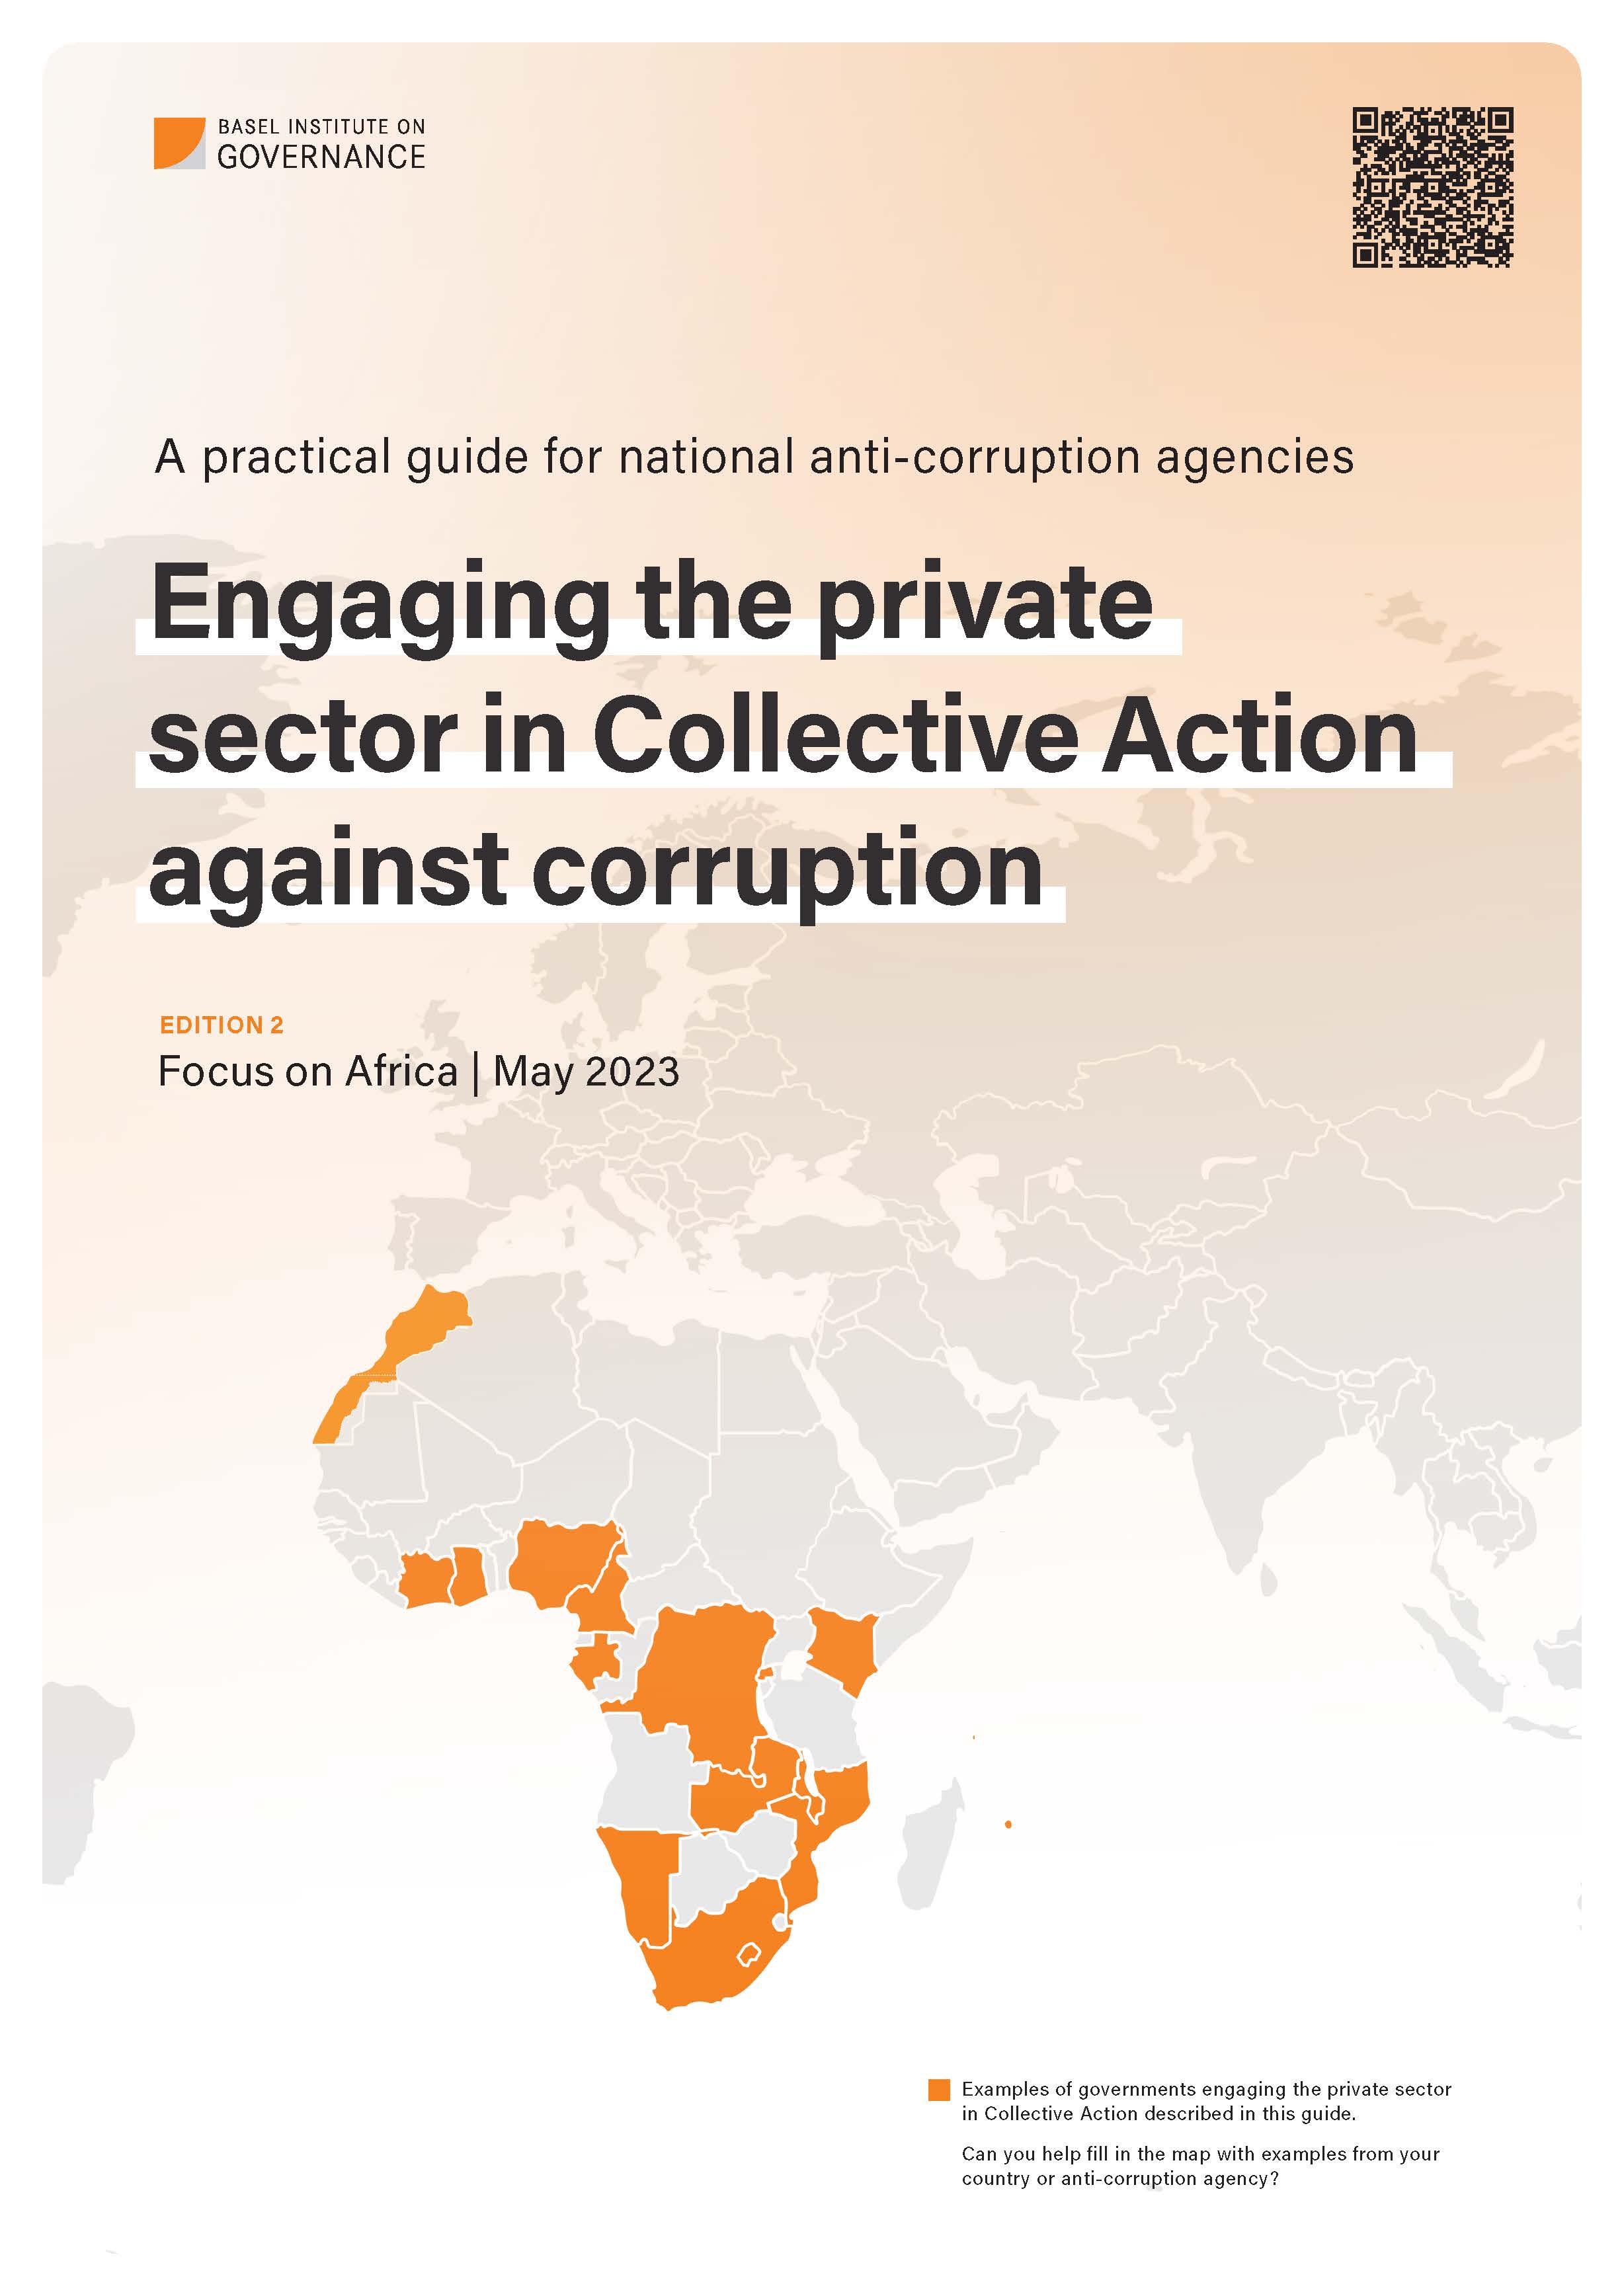 Cover page of publication on engaging the private sector in Collective Action against corruption